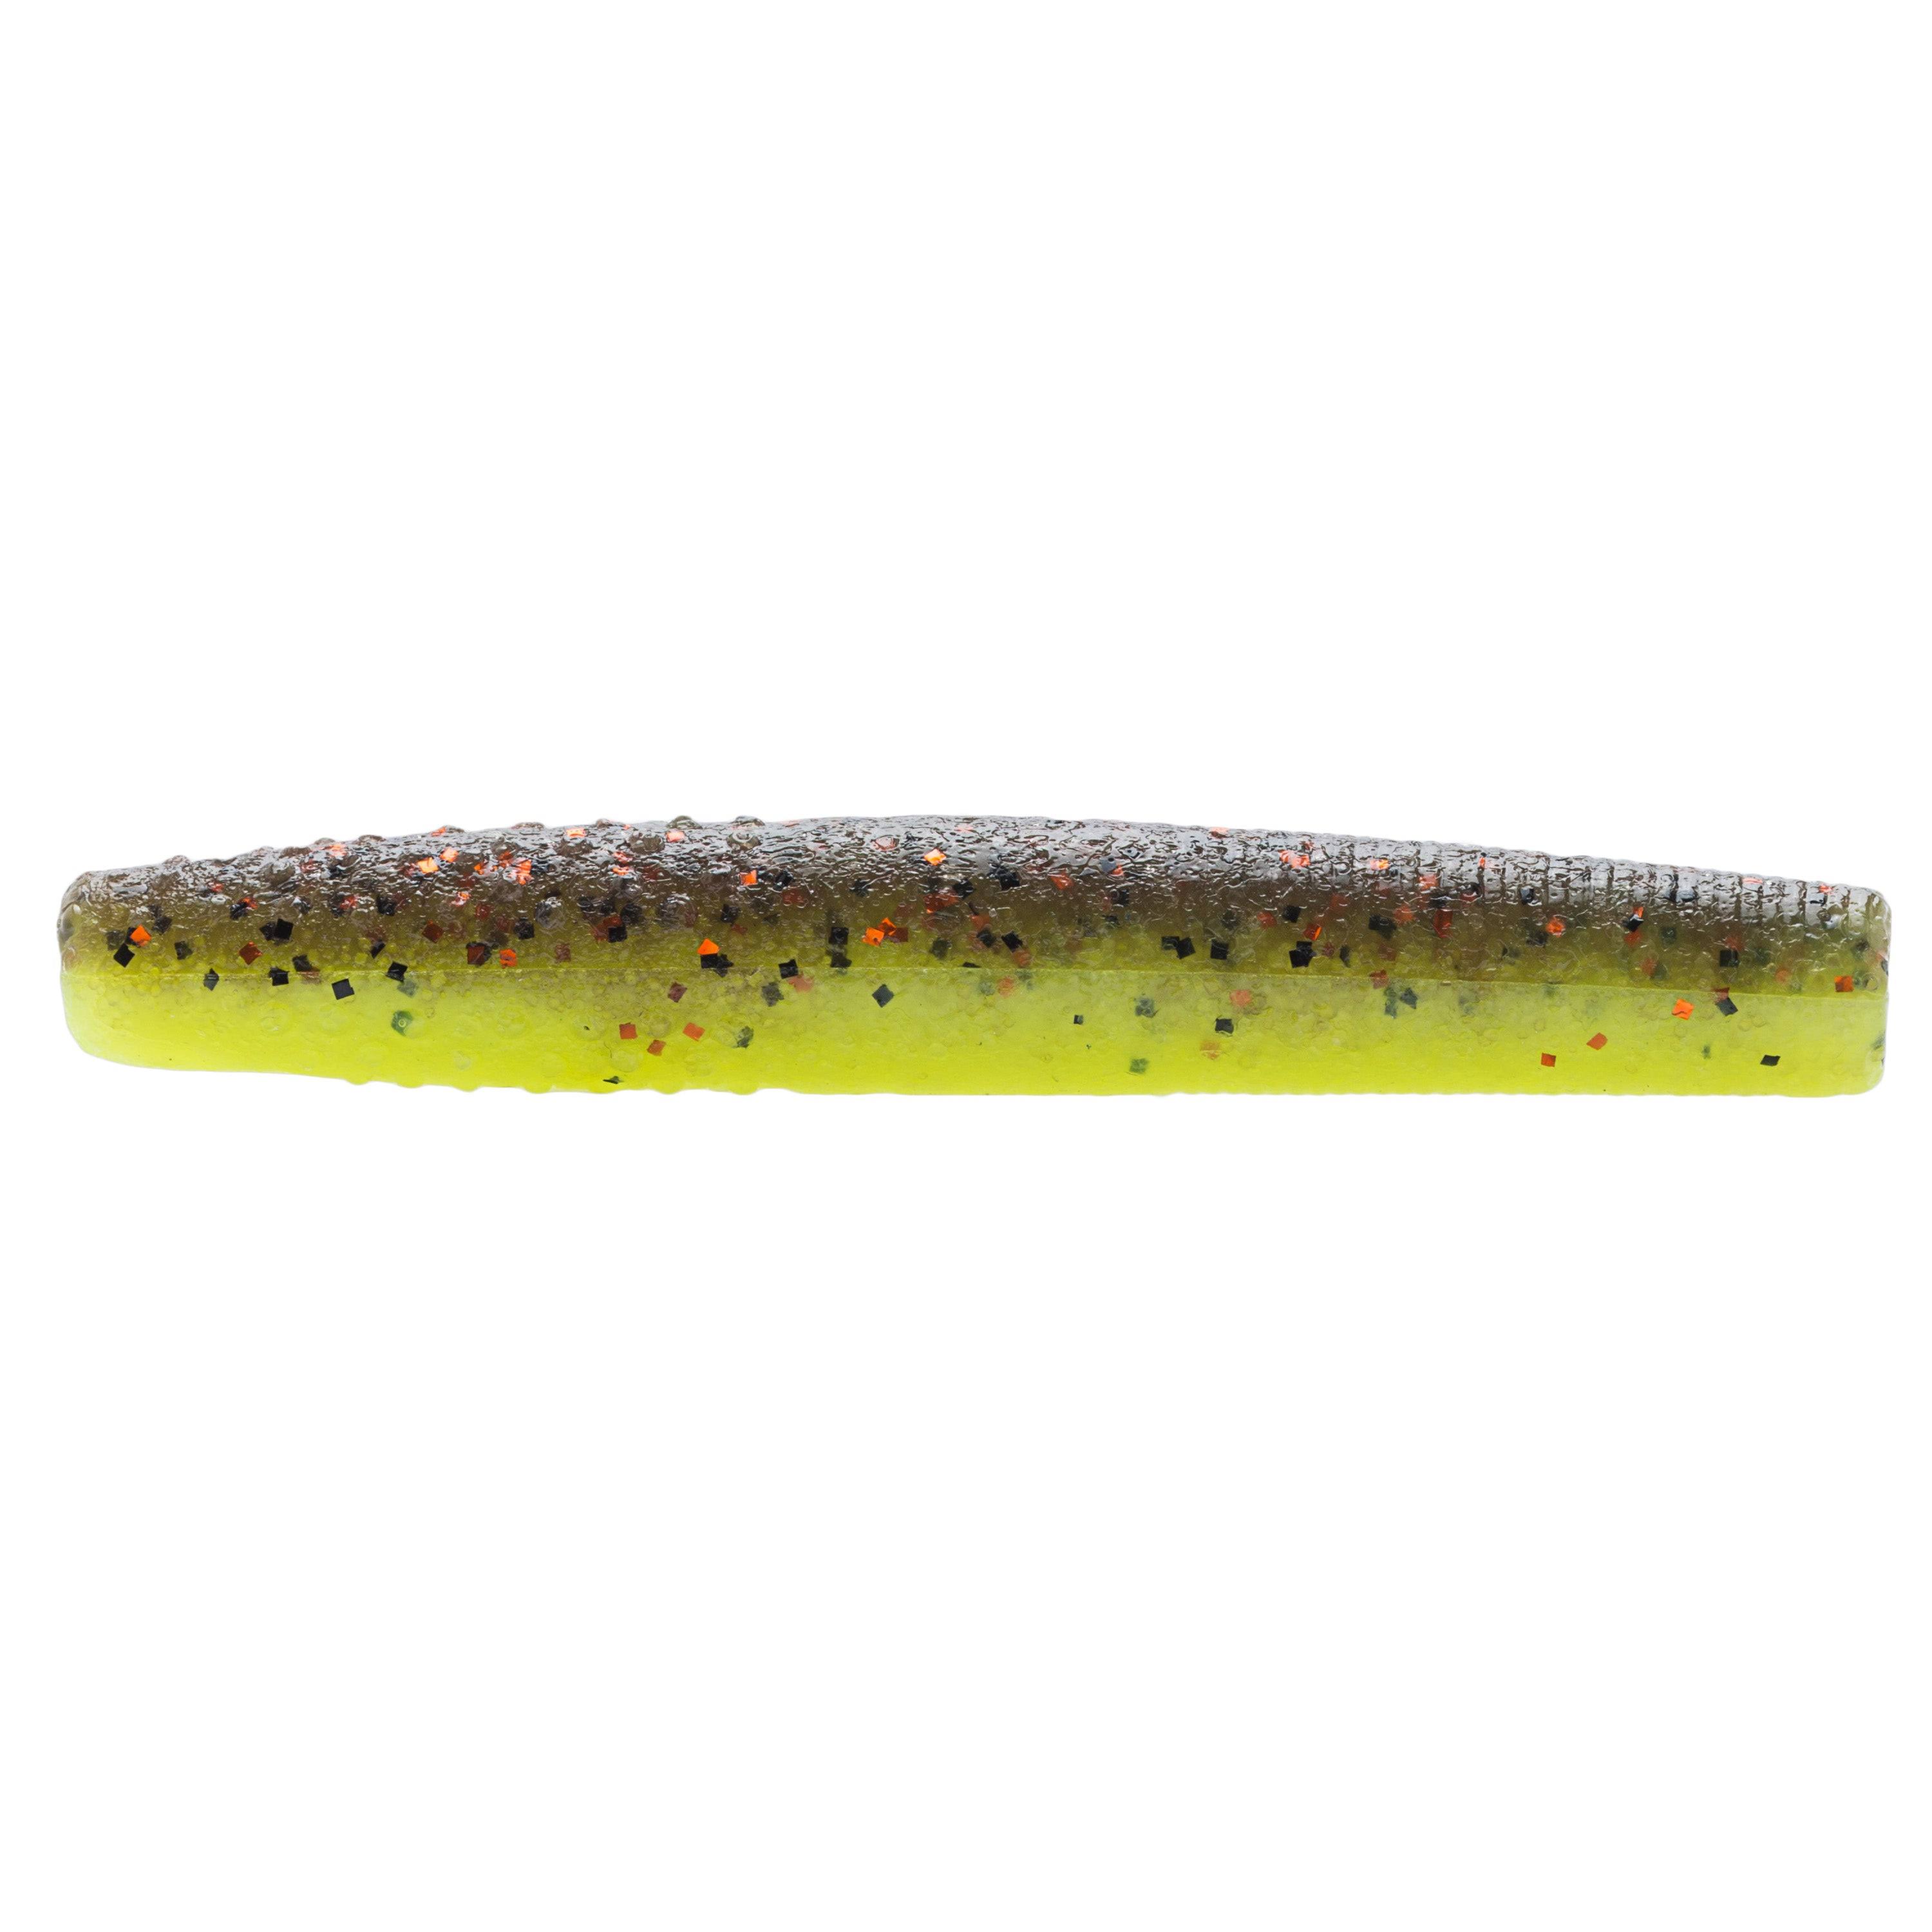 Z-Man Finesse TRD Tackle Fishing Terminal - Coppertreuse, 2.75"